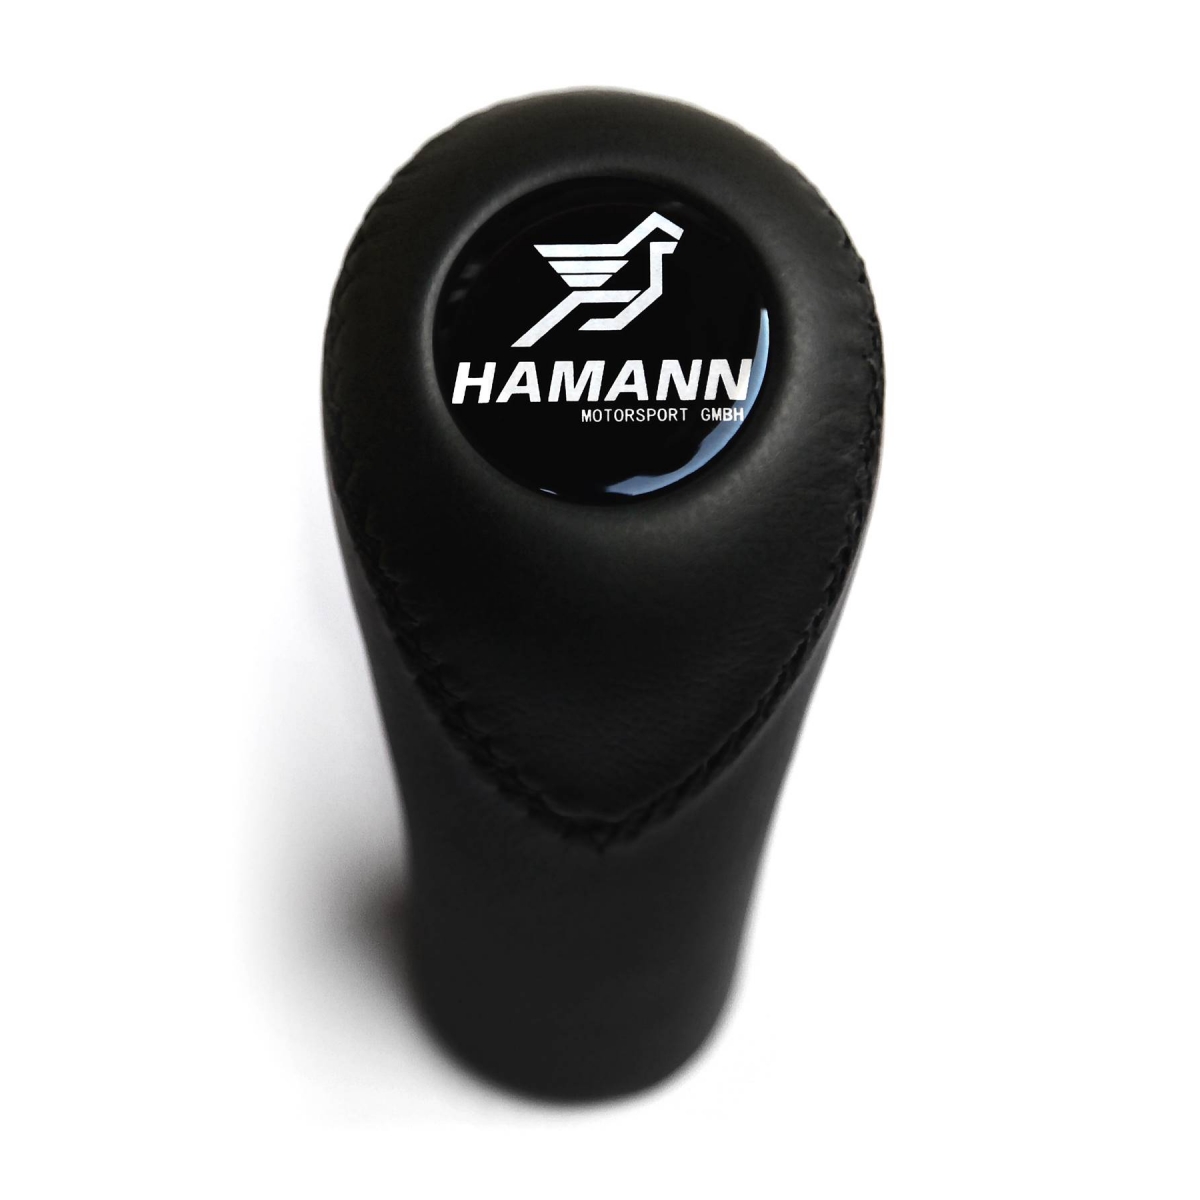 Gear Stick Shift Knob For BMW 3 5 6 7 8 Series Hamann 4-5-6 Speed Manual  Transmission Genuine Leather Shifter Lever Push-in Type 